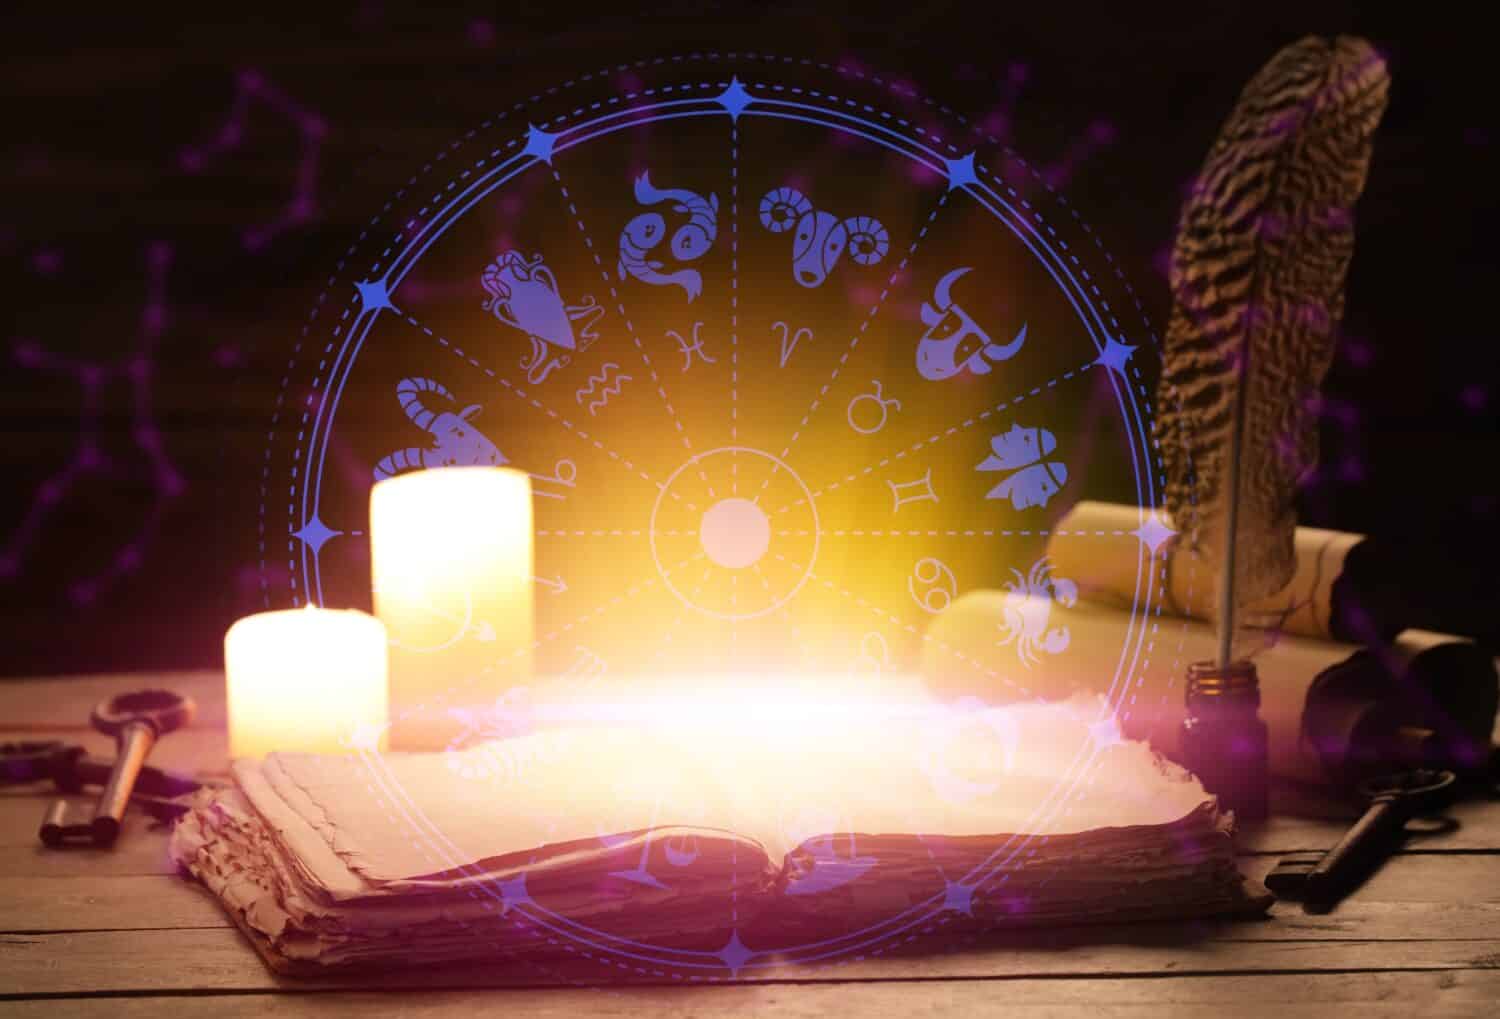 Open book, candles and astrological signs on table against dark background